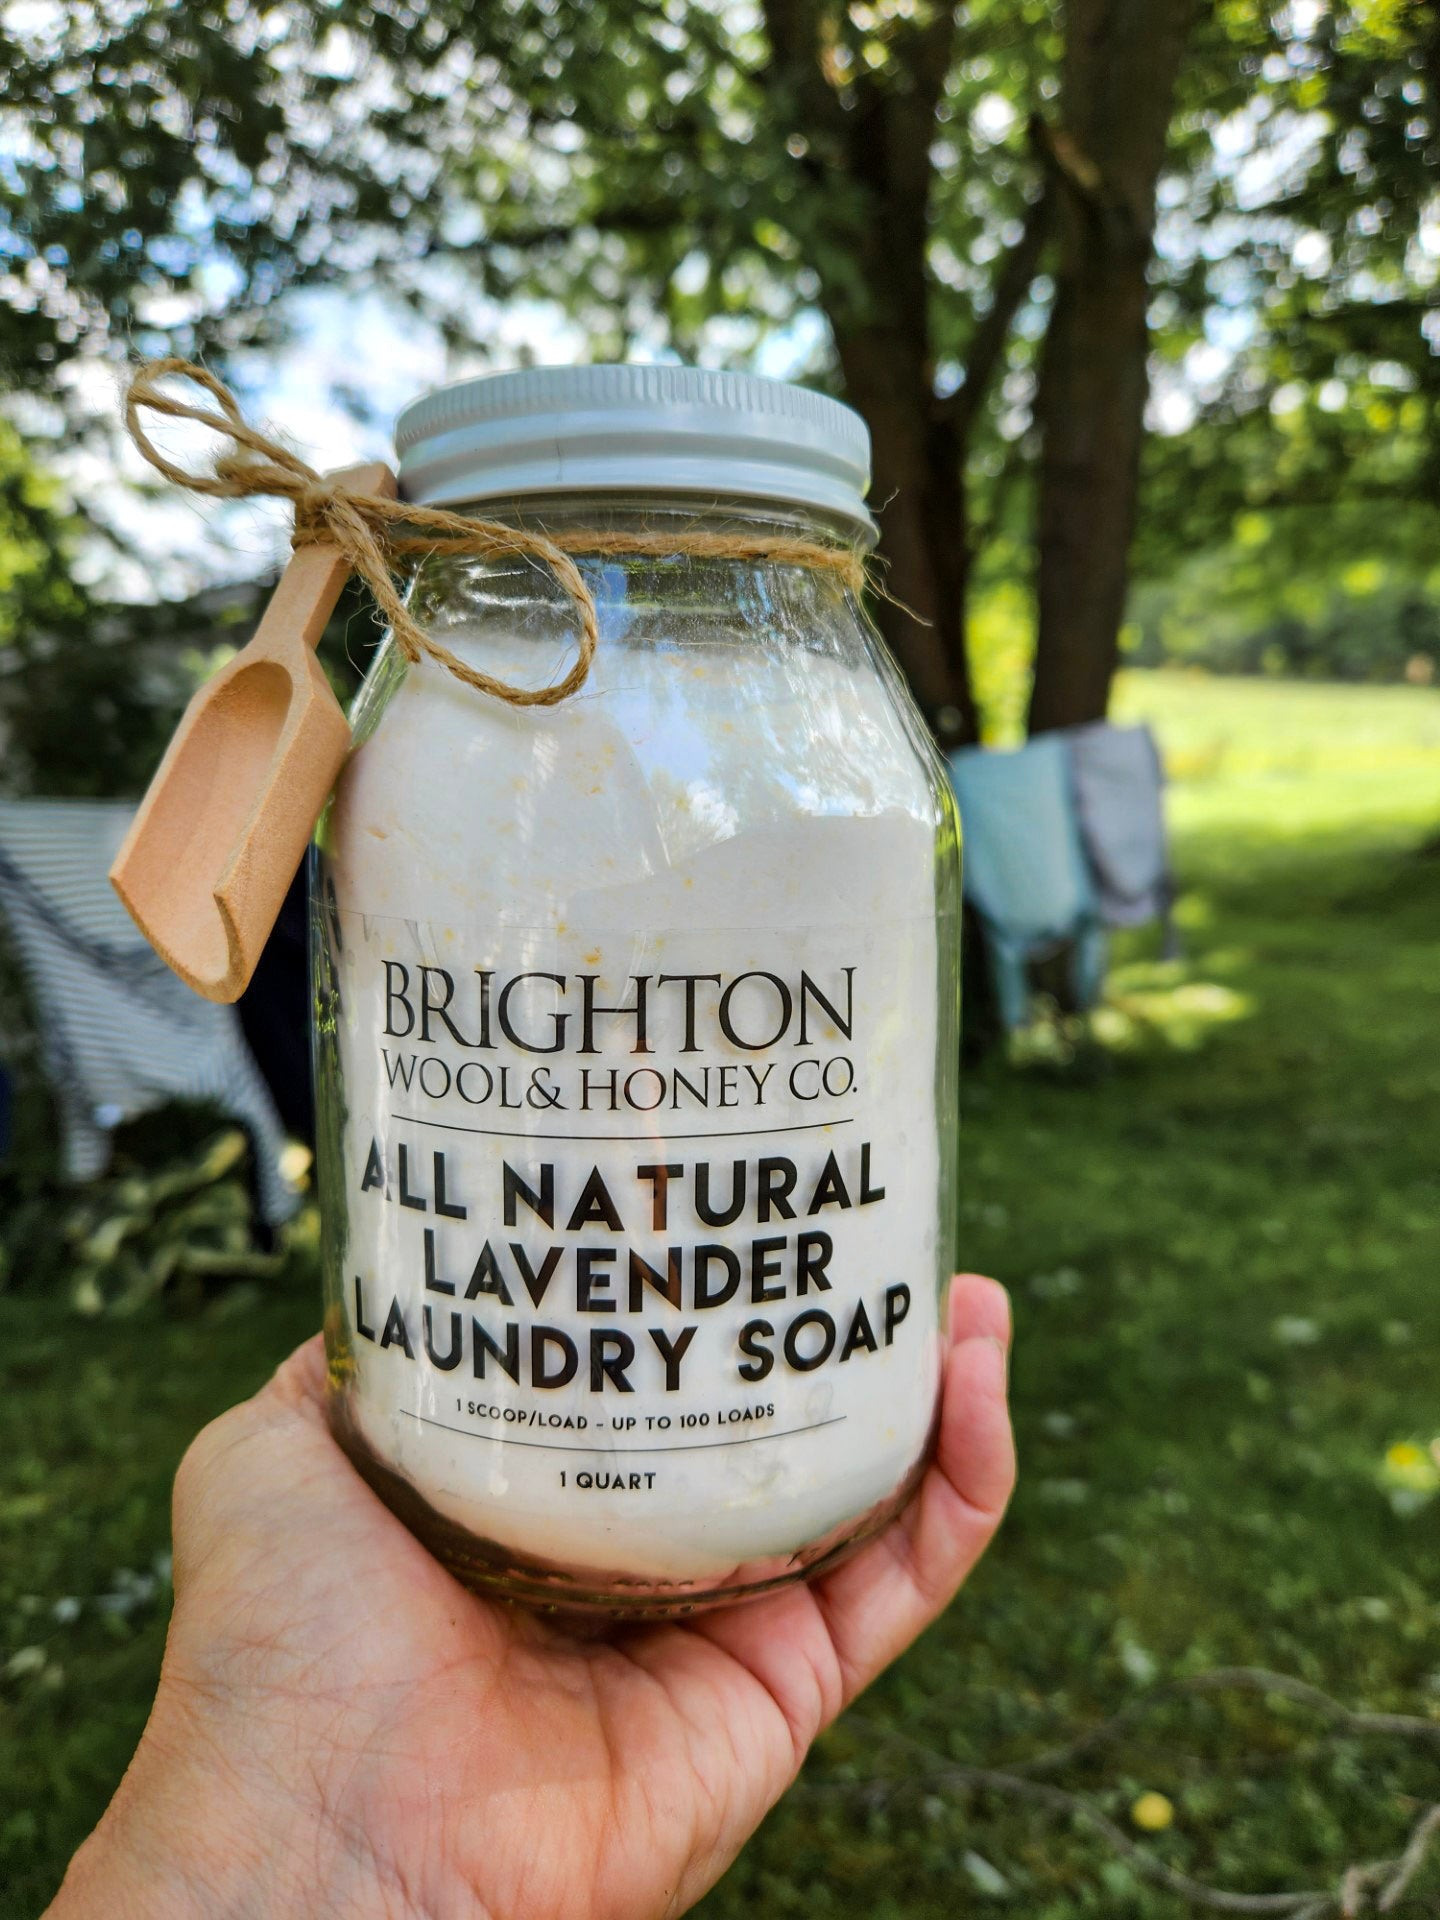 All-Natural Lavender Laundry Soap